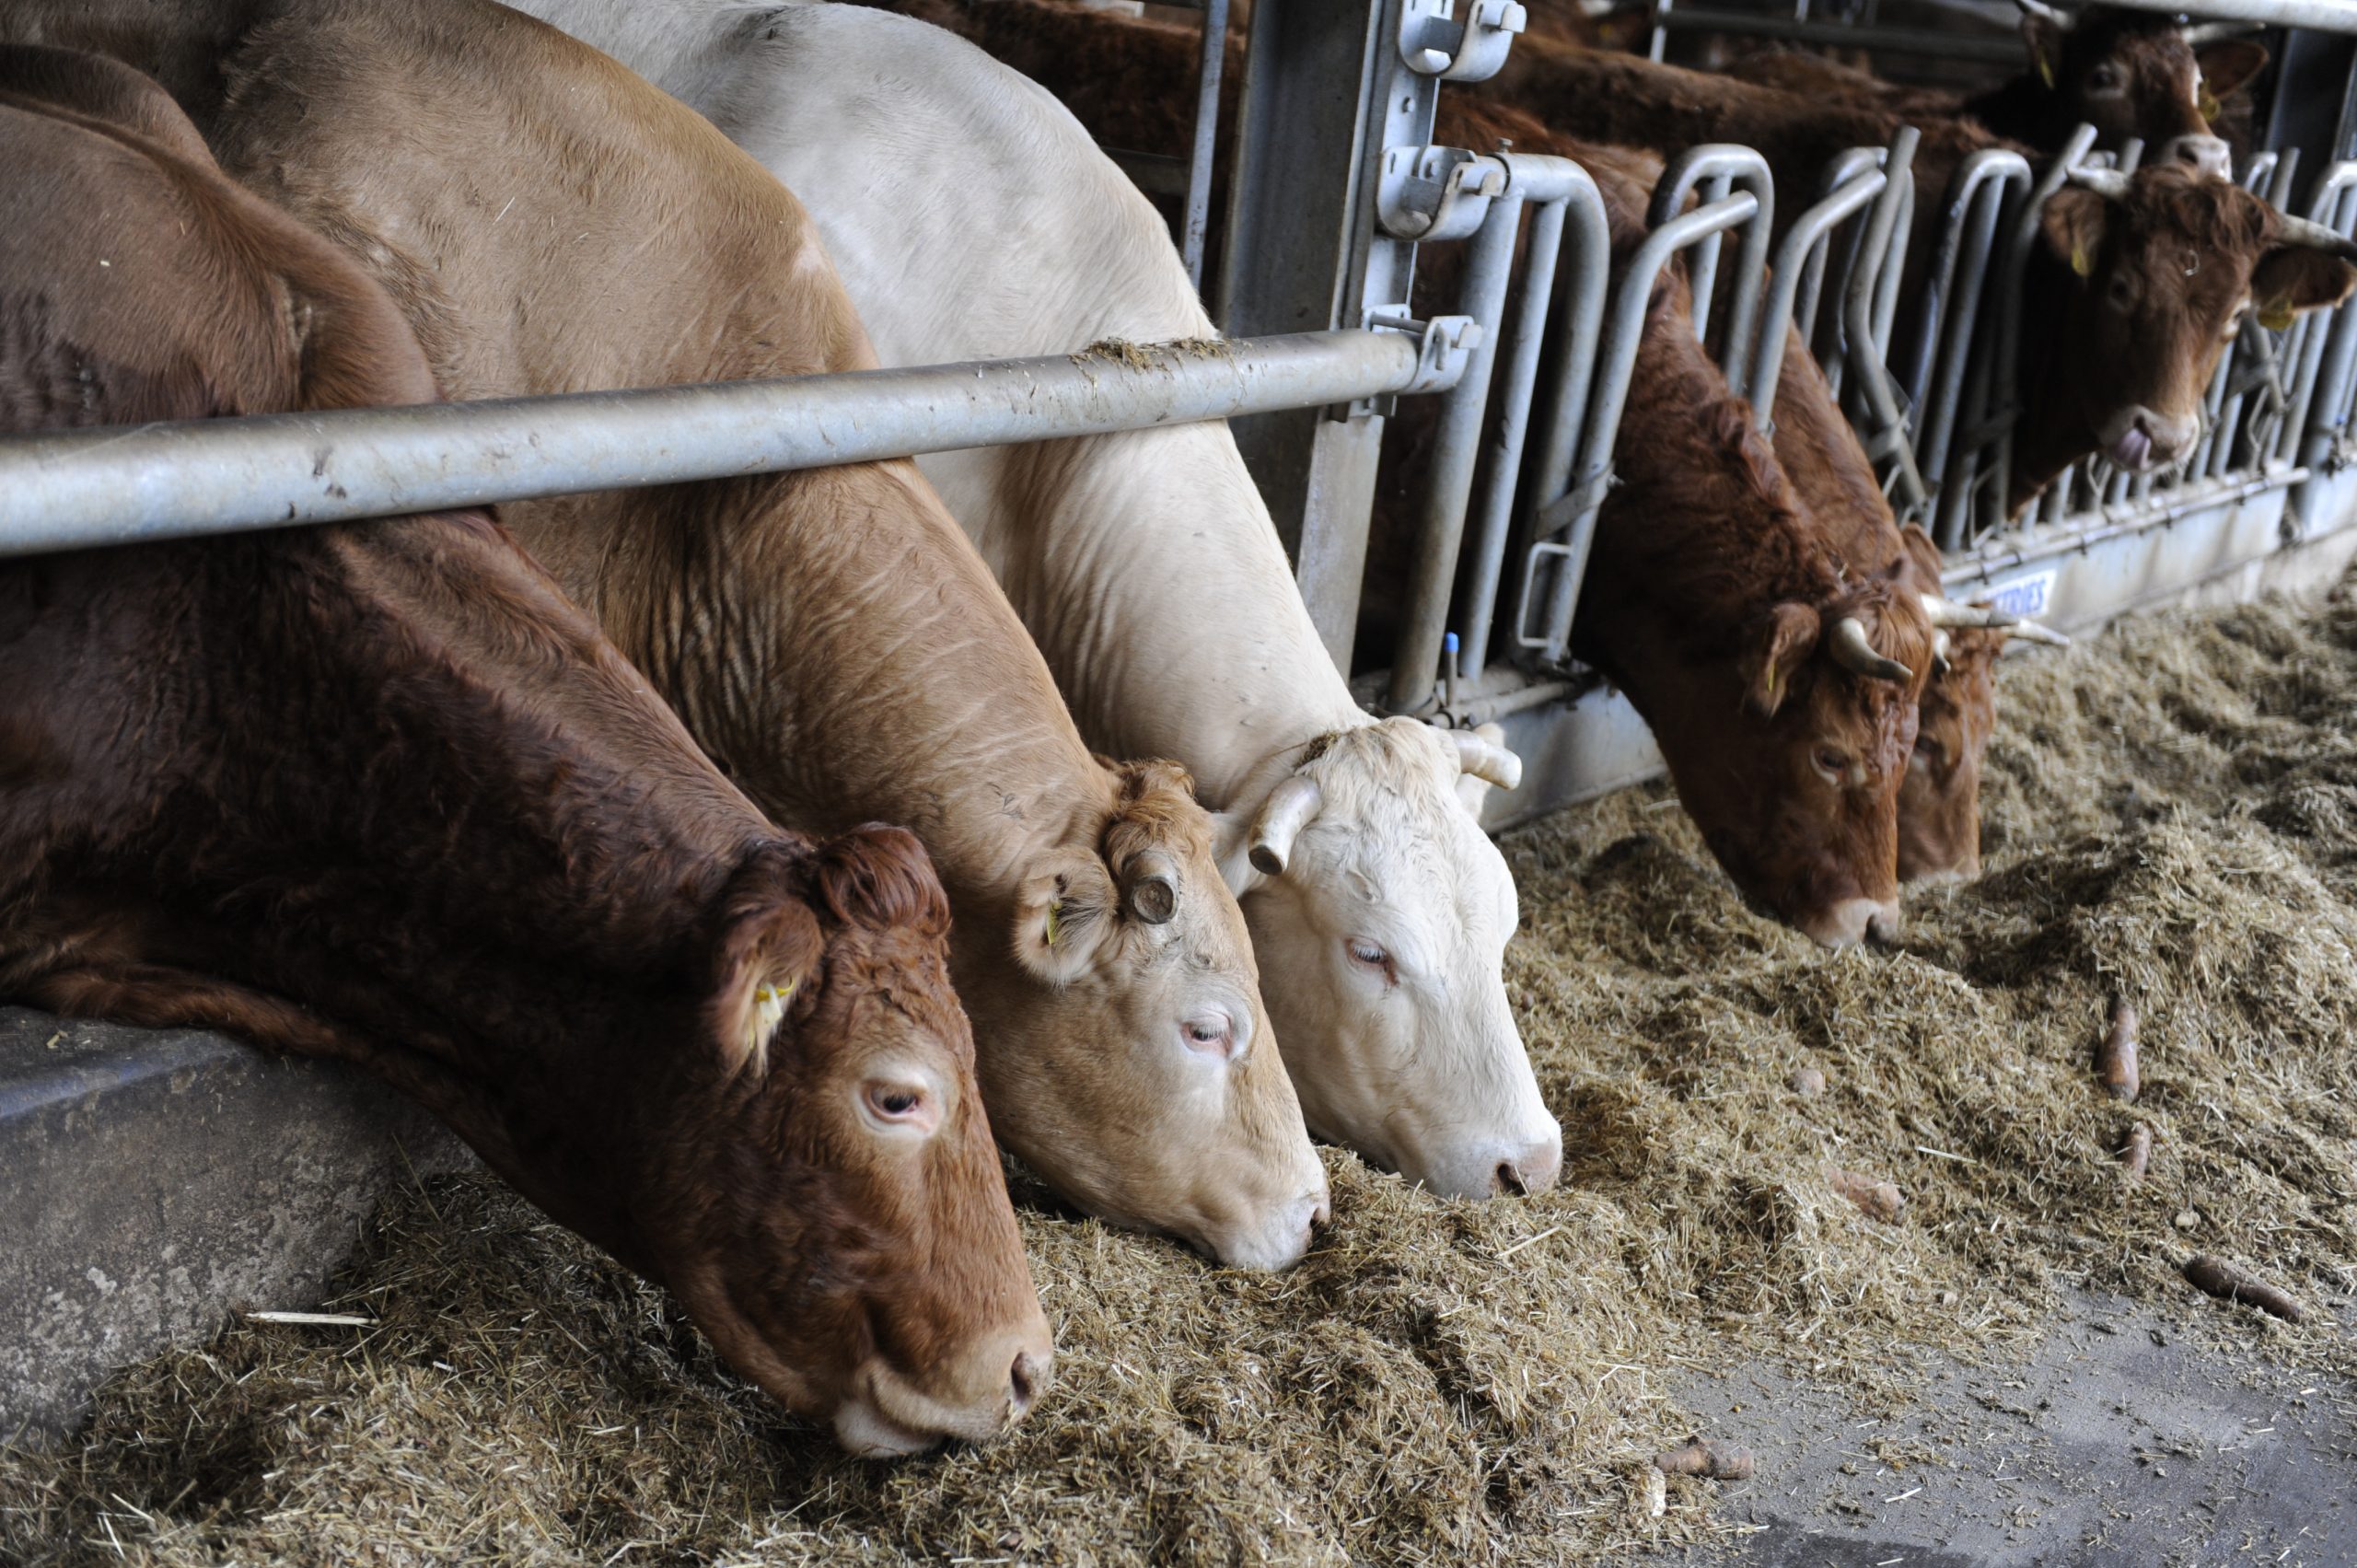 Vitamins, minerals and trace elements are dynamic nutrients which are usually added in all ruminants’ complementary feed rations.